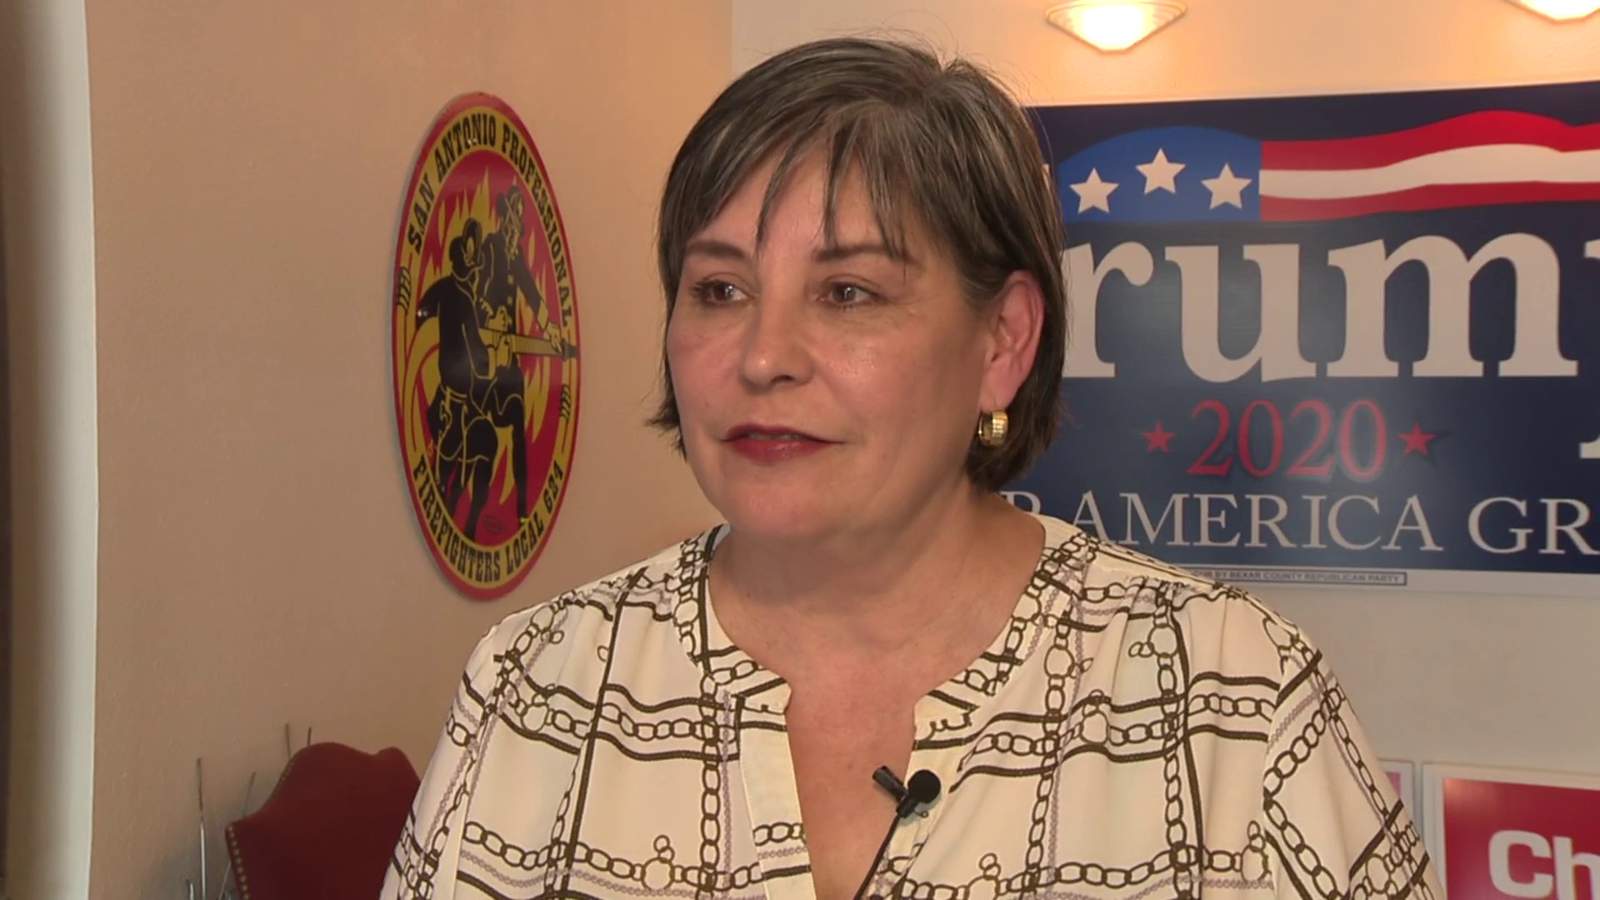 Bexar County GOP Chair says she won’t resign despite calls from top Texas Republicans over George Floyd post